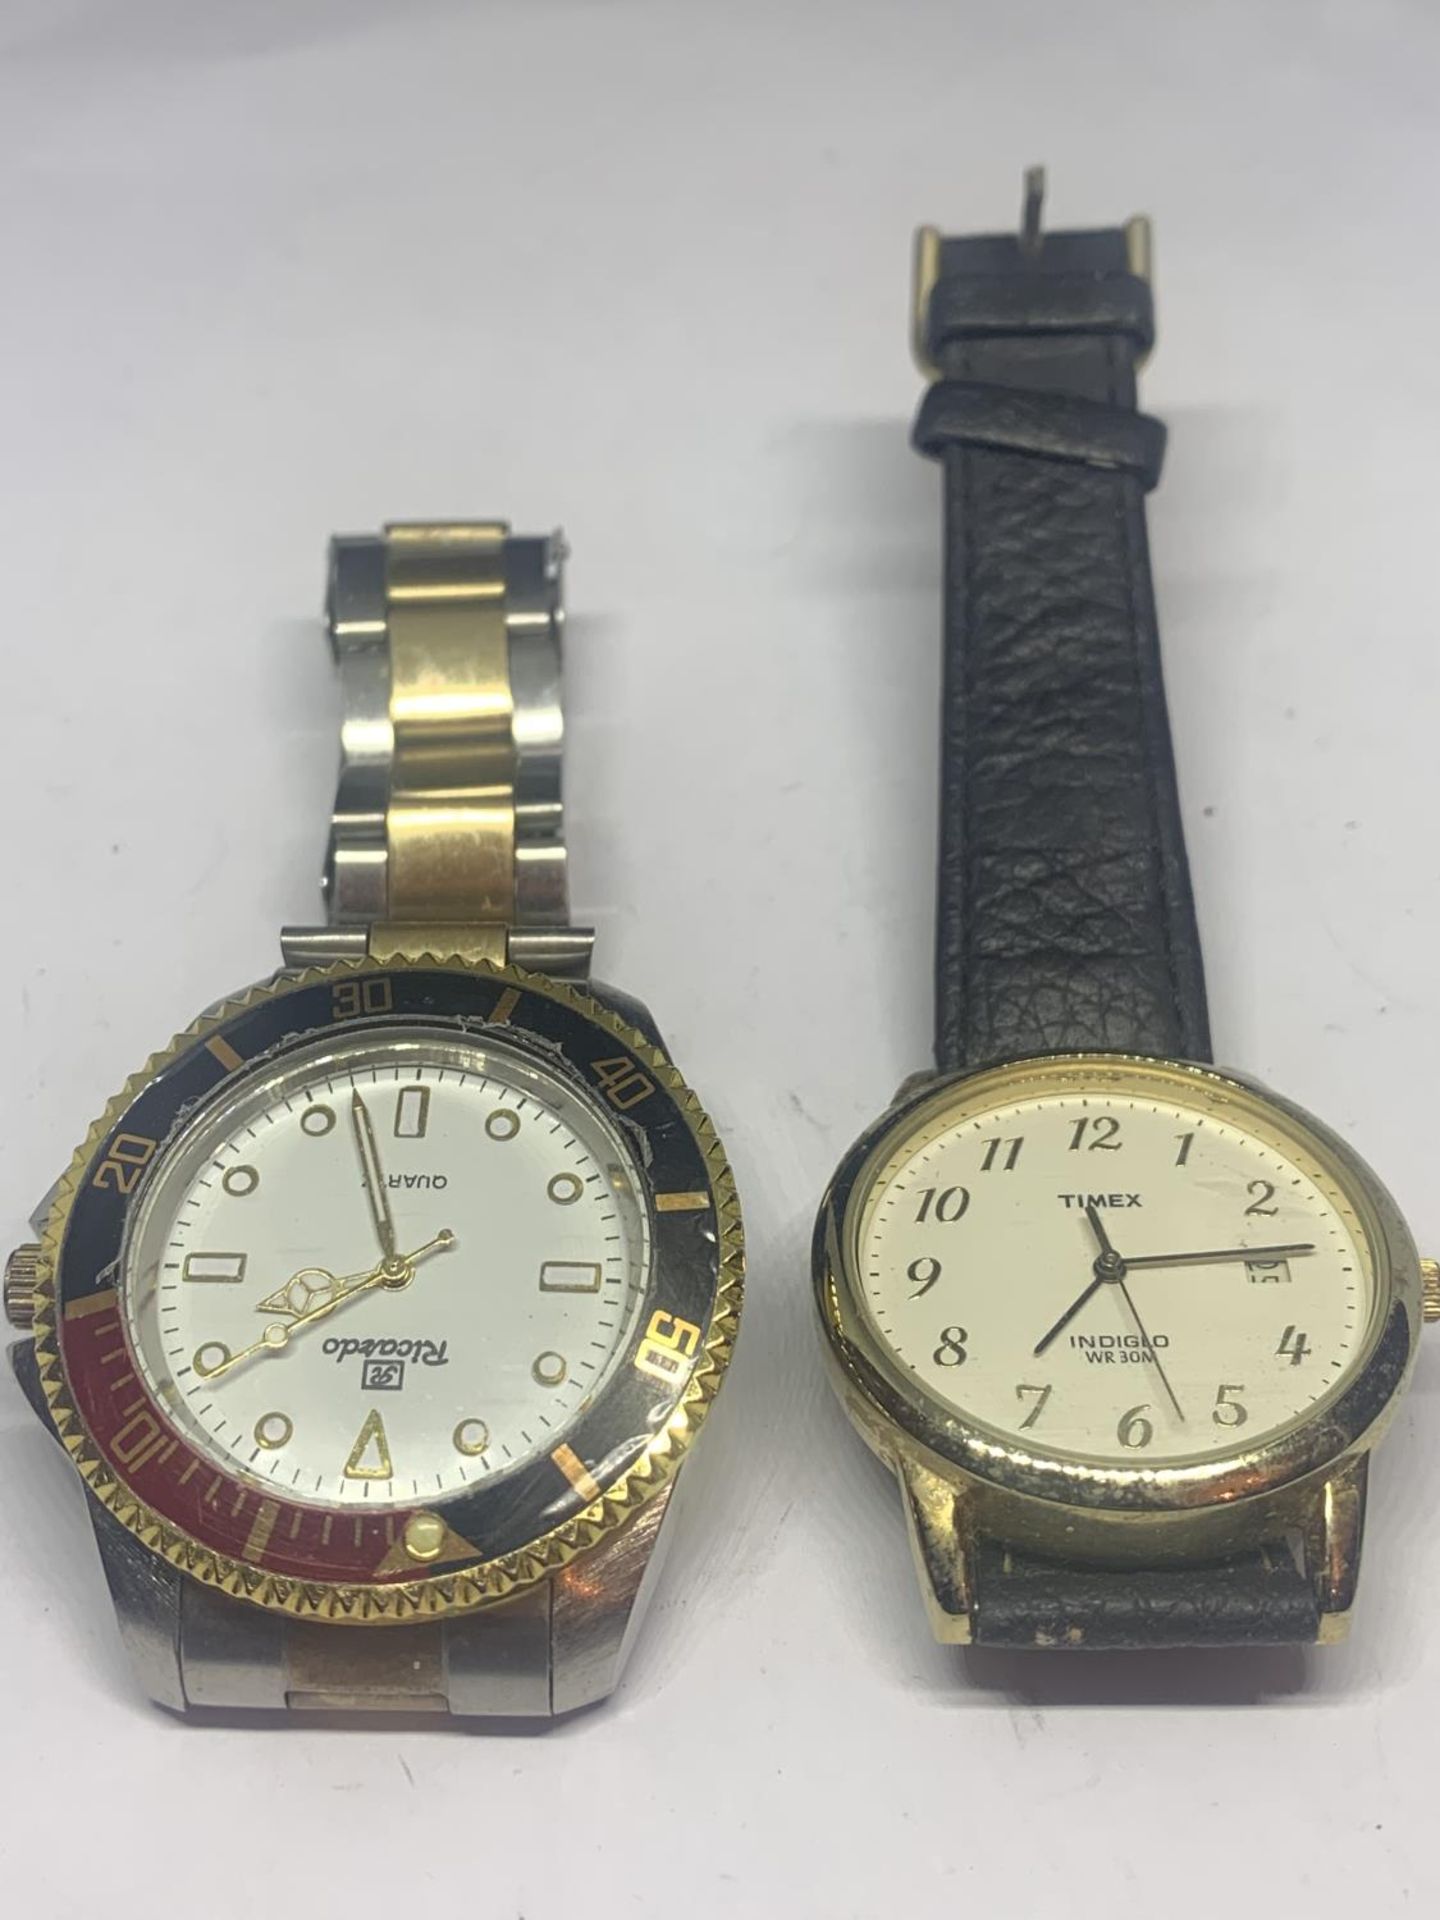 TWO WRIST WATCHES TO INCLUDE A RICARDO AND A TIMEX